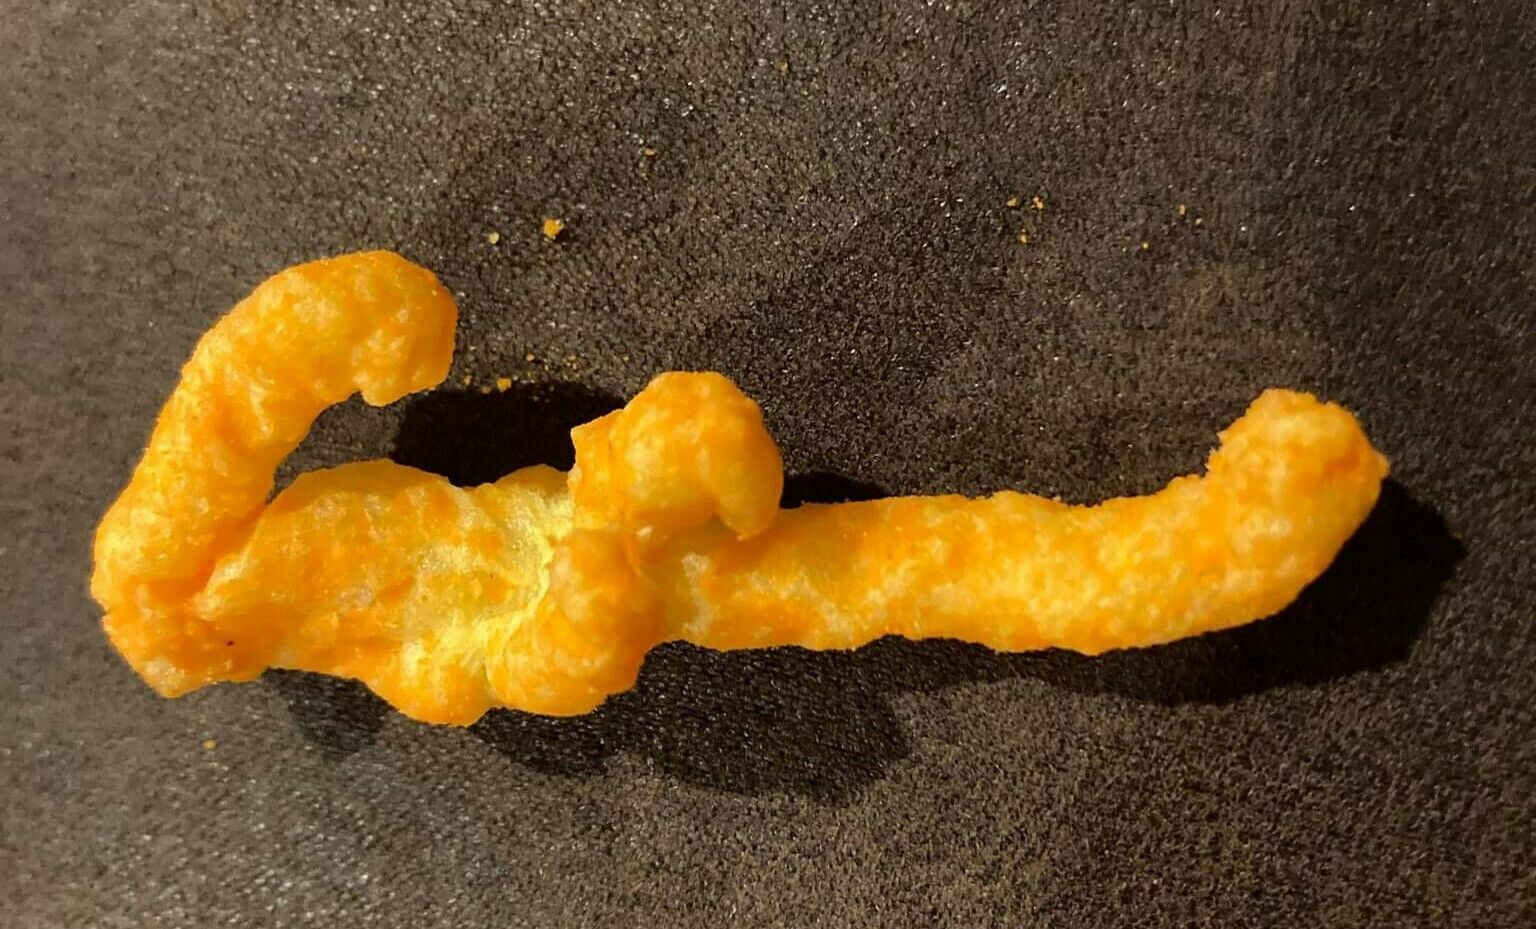 Cheeto Shaped Like Man Trying Escape A Snake Look!! Very Cool And Rare!!!